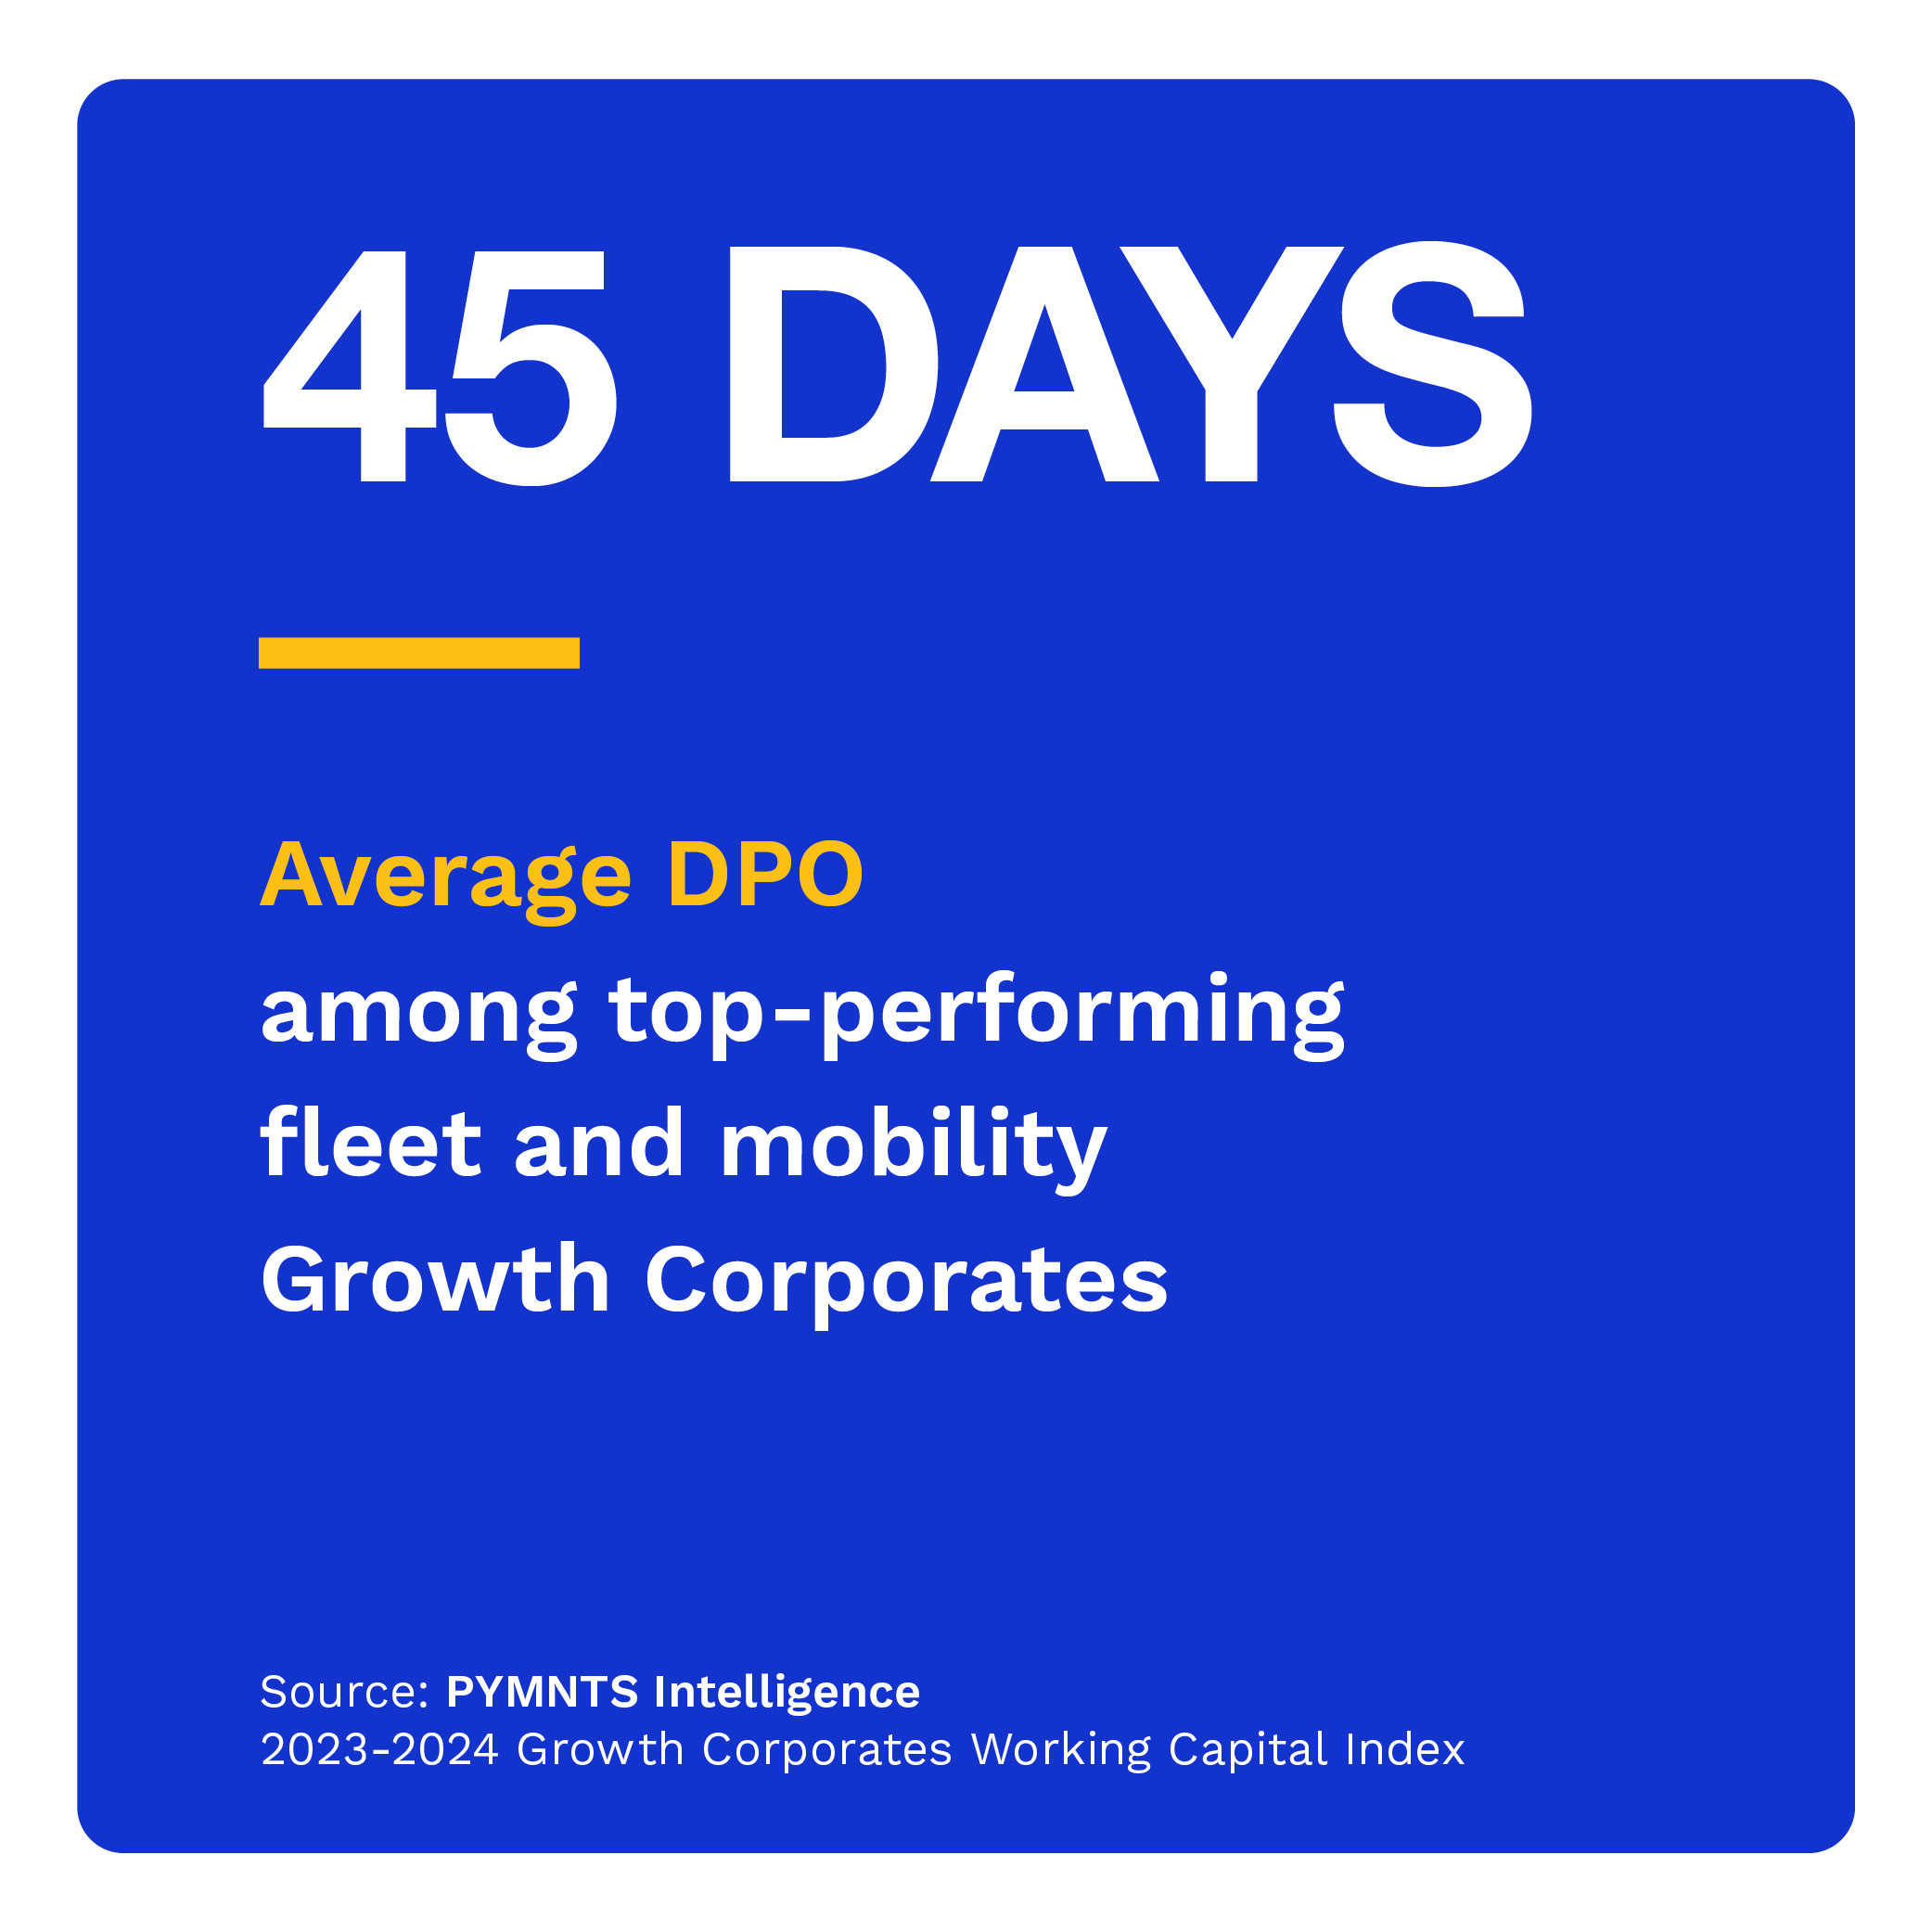 45 Days: Average DPO among top-performing fleet and mobility Growth Corporates